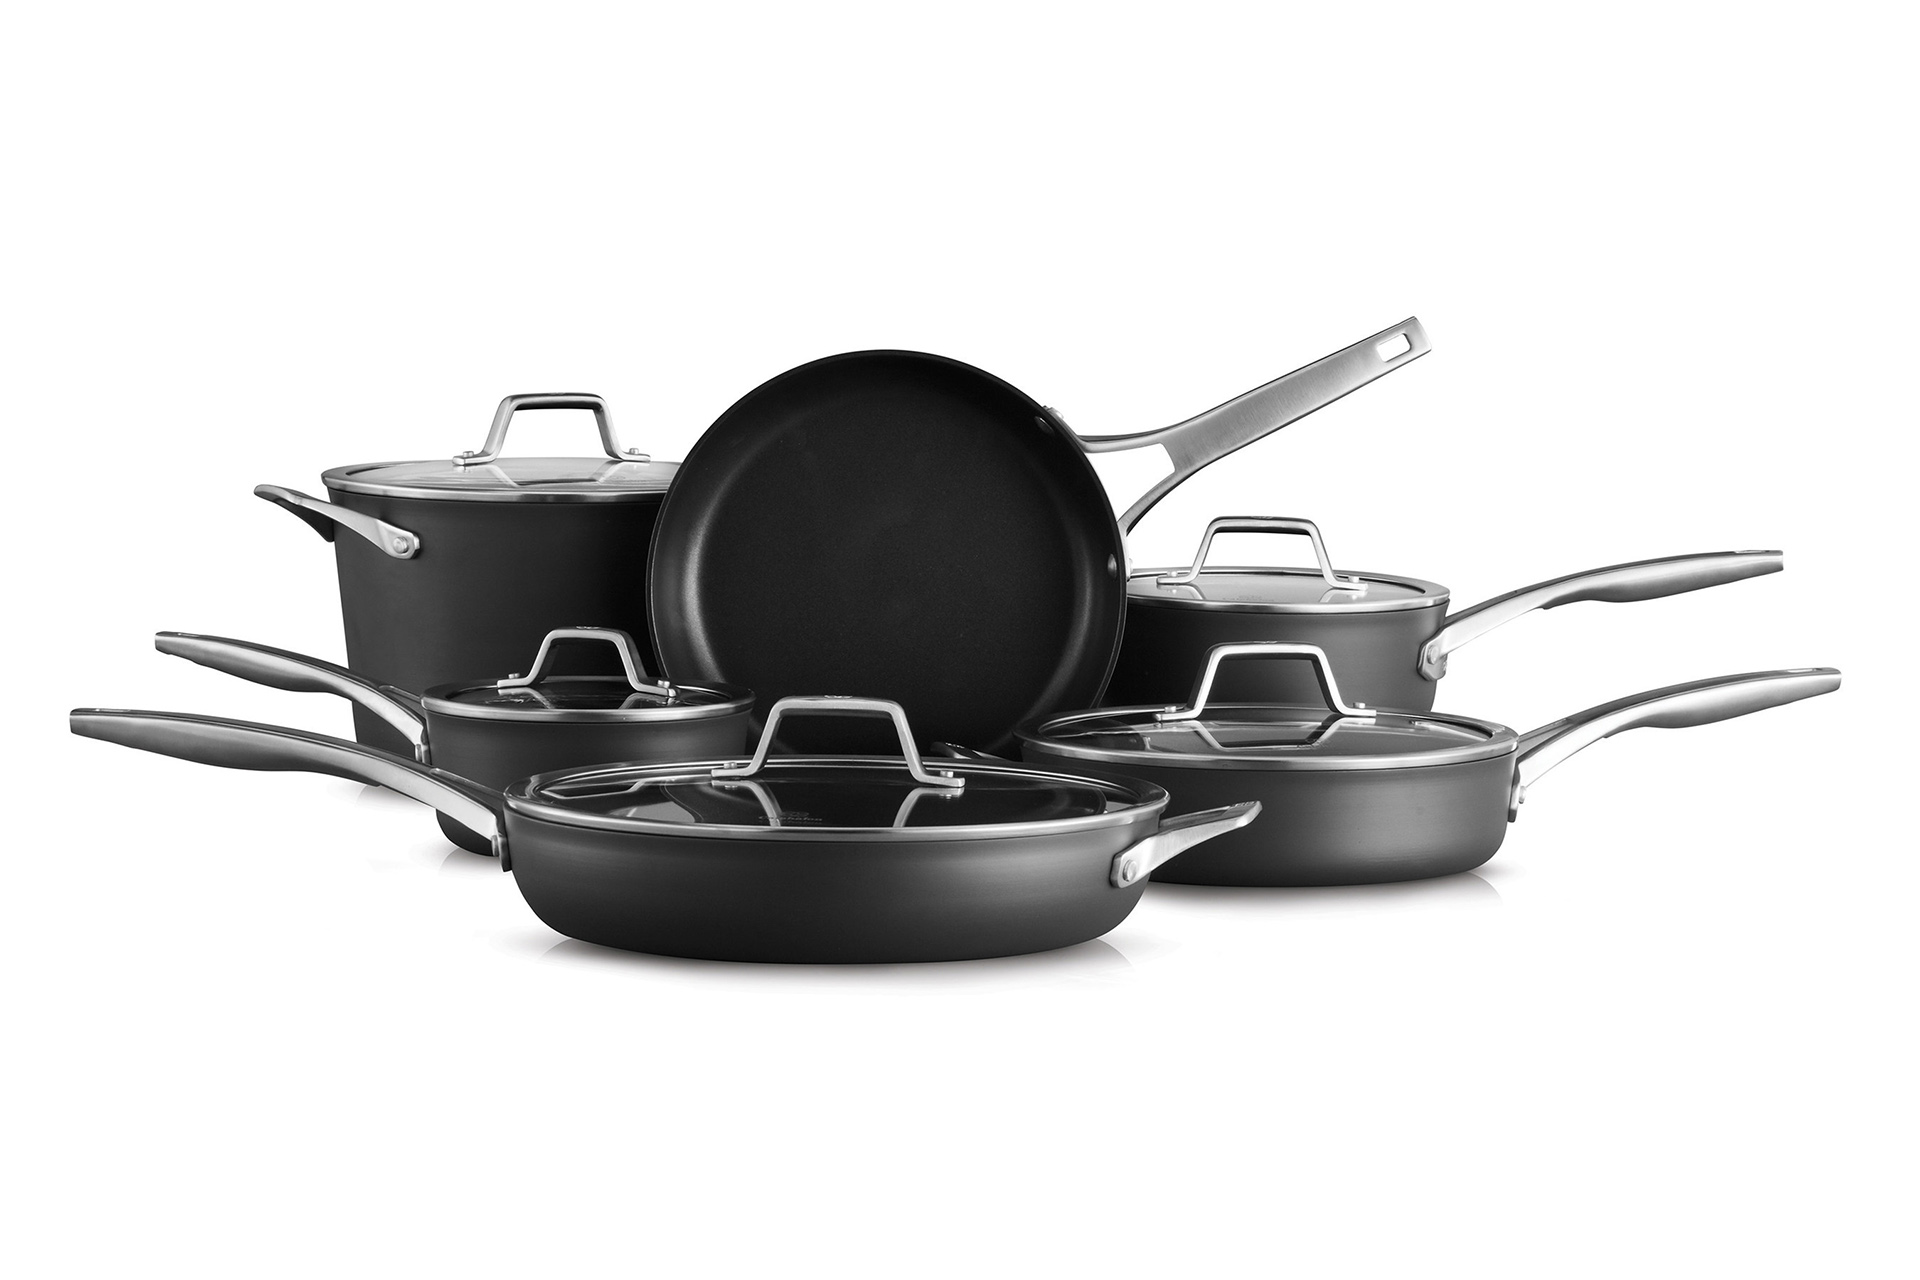 Select By Calphalon With Aquashield Nonstick 10pc Cookware Set